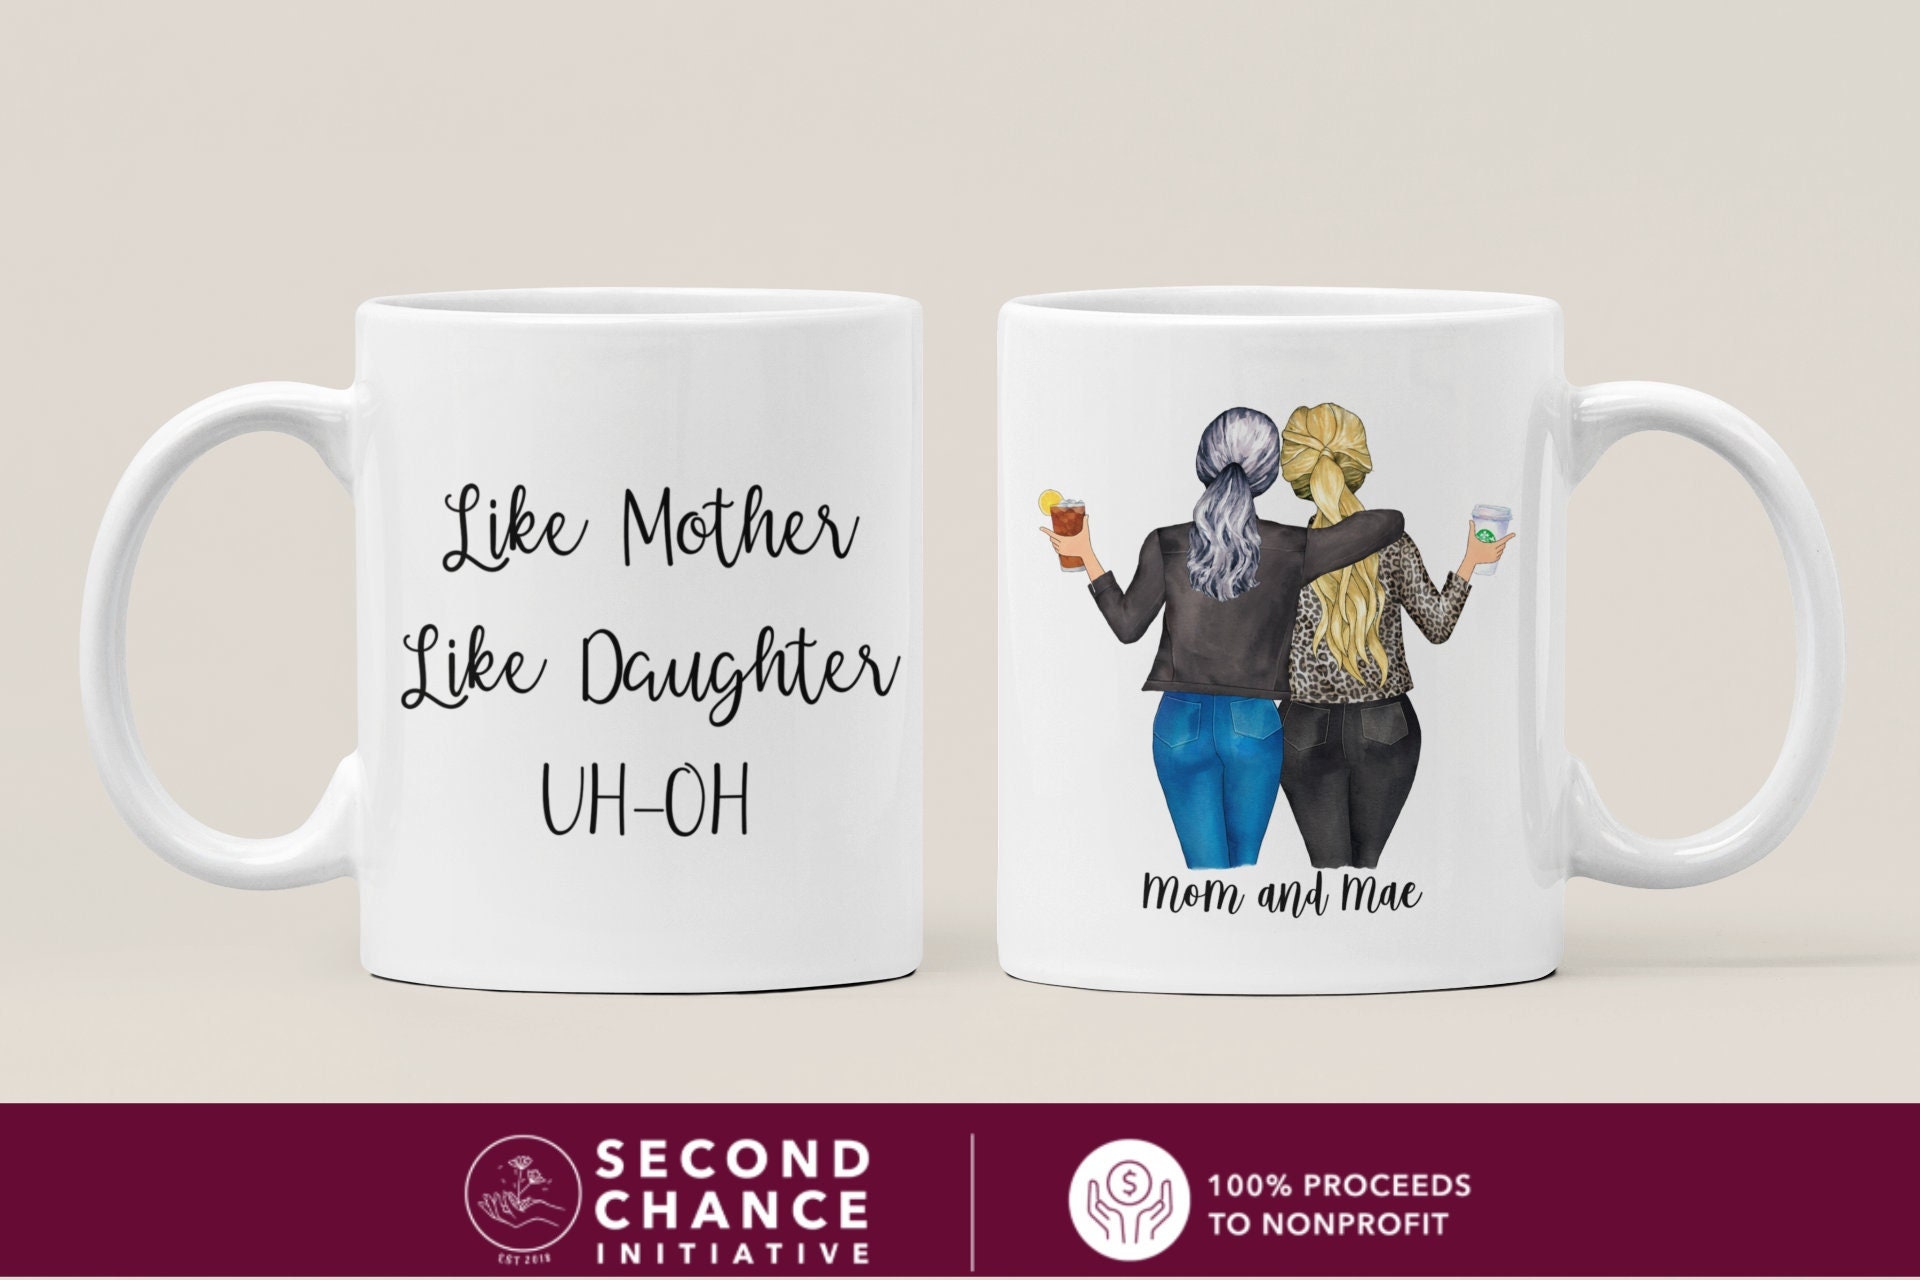 Personalized mug for Mom and Daughter — Glacelis